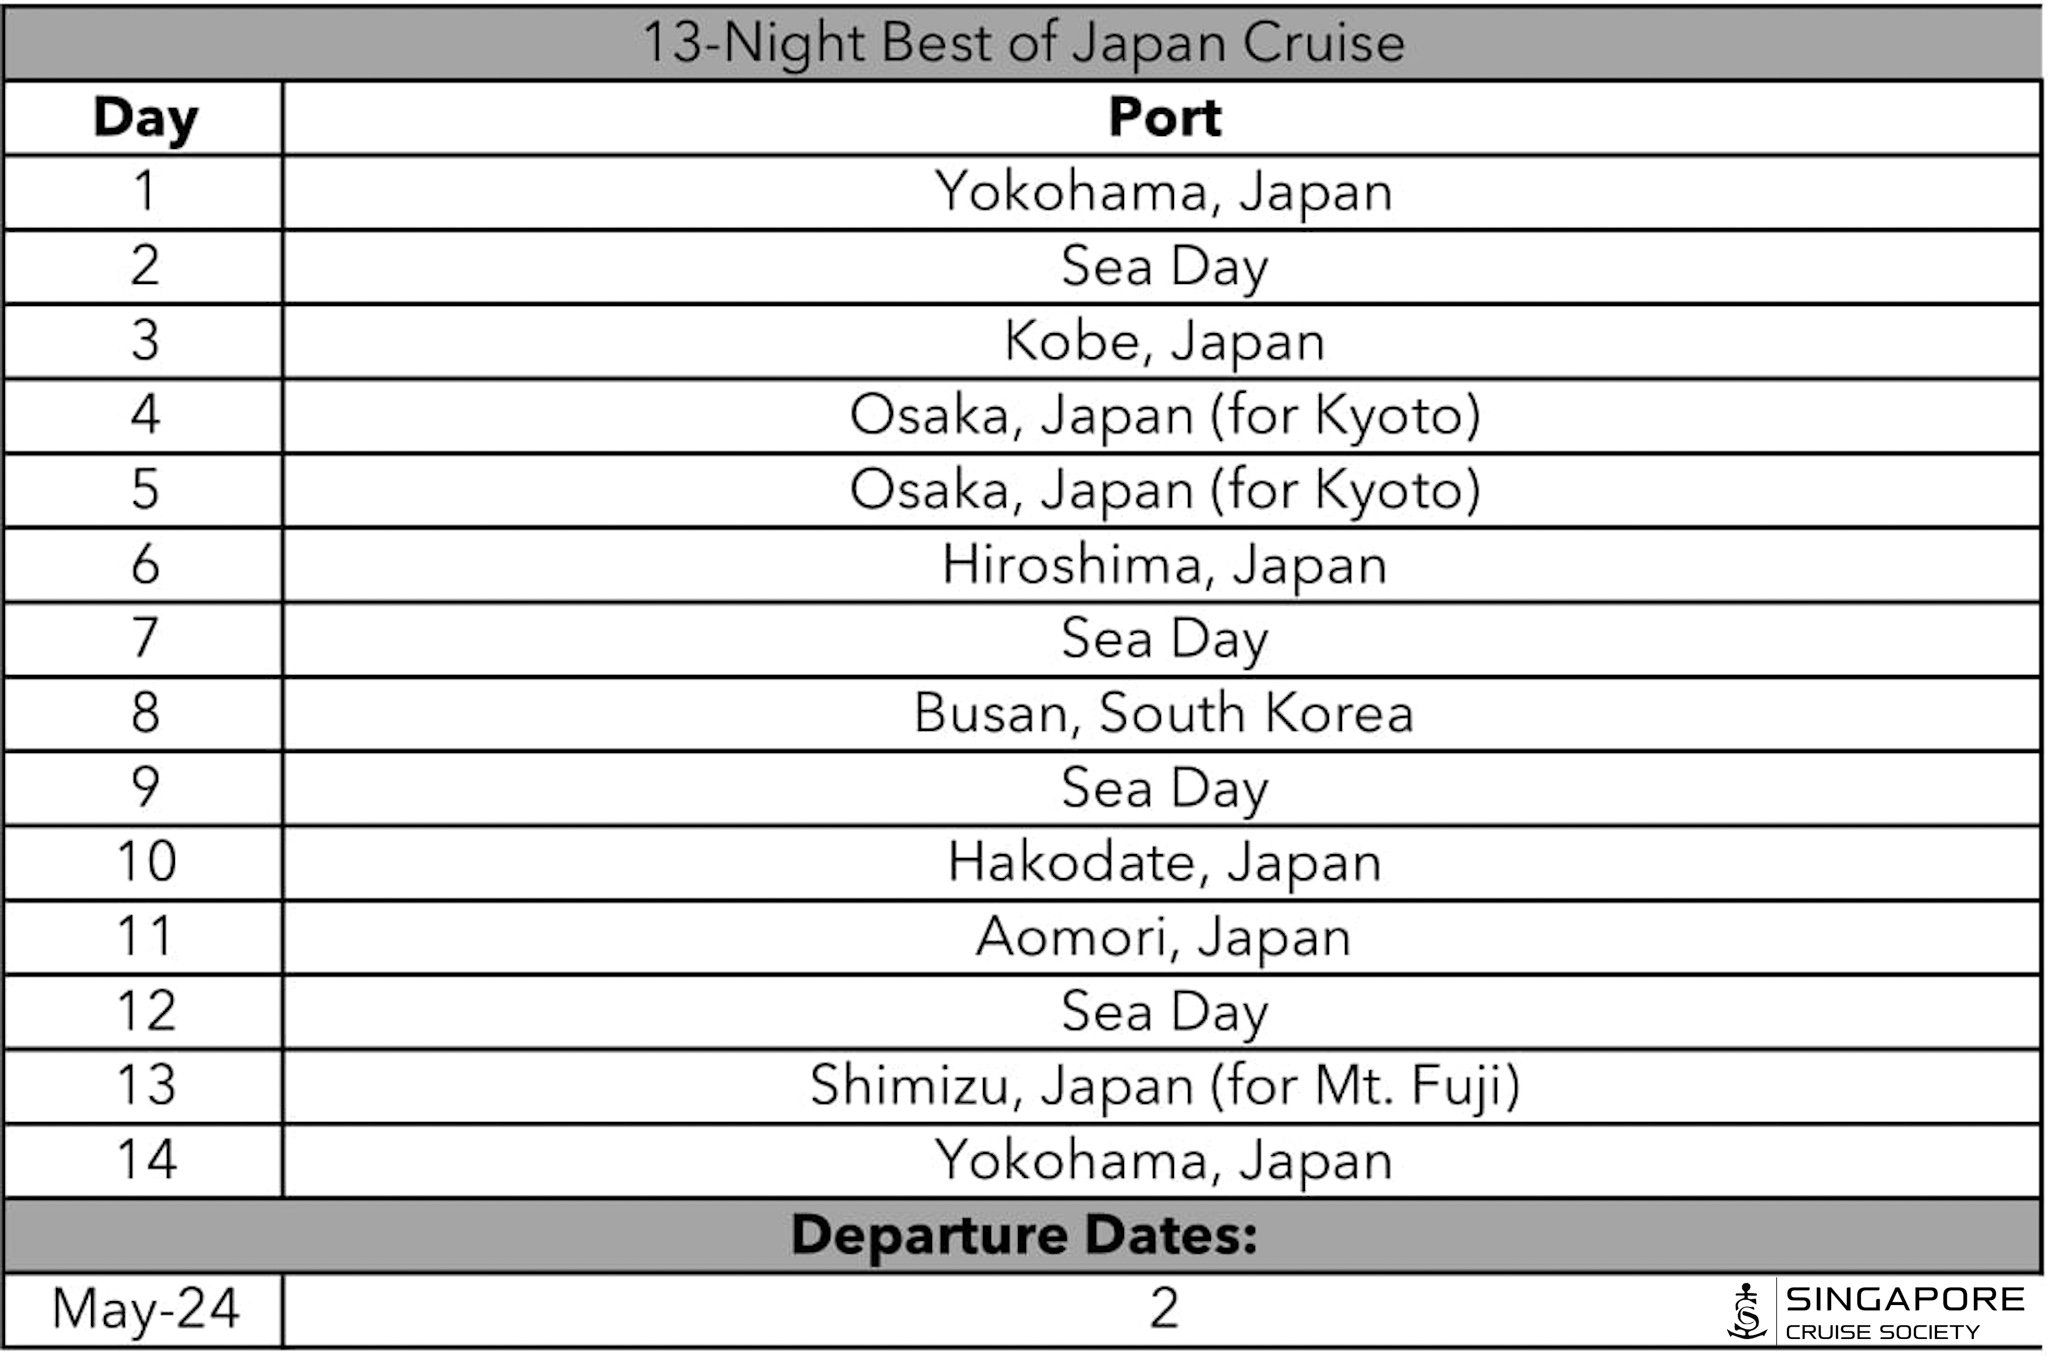  The 13-night cruise includes an additional stop in Kobe.   PHOTO: SINGAPORE CRUISE SOCIETY  